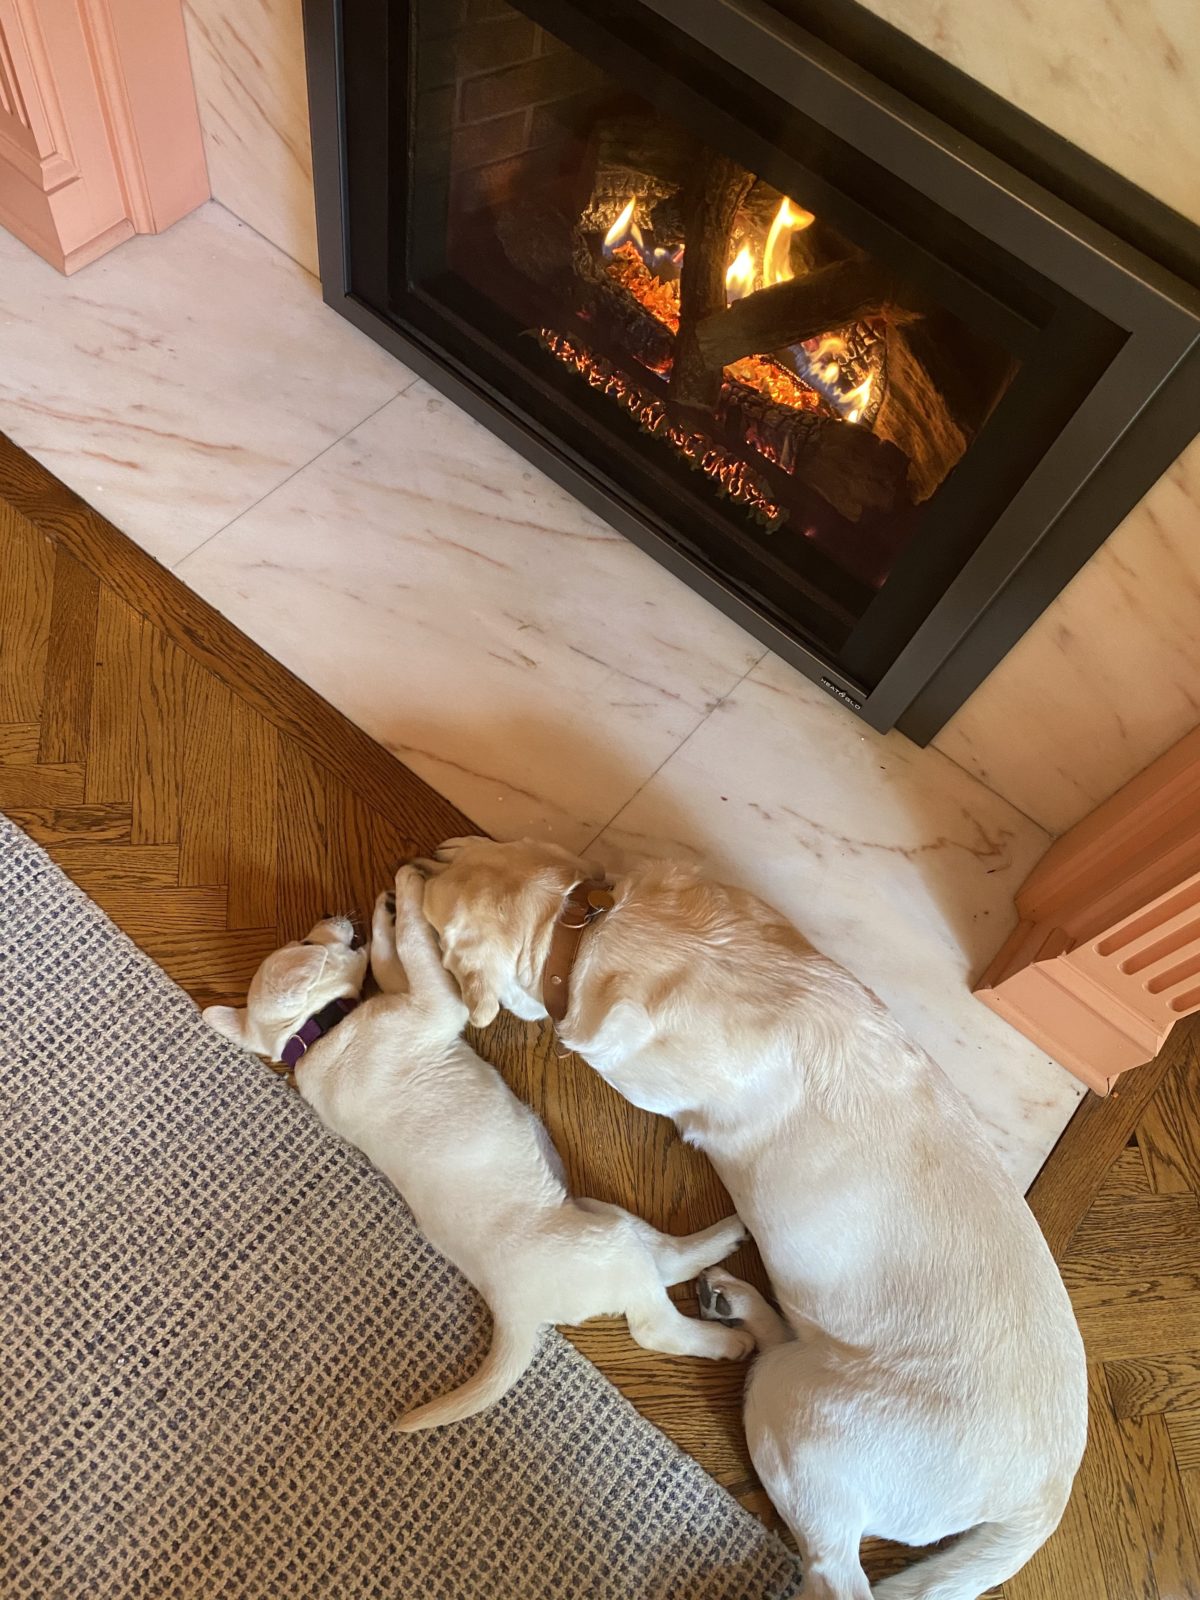 Top down of two dogs sleeping and snuggling in front of a Heat & Glo fireplace